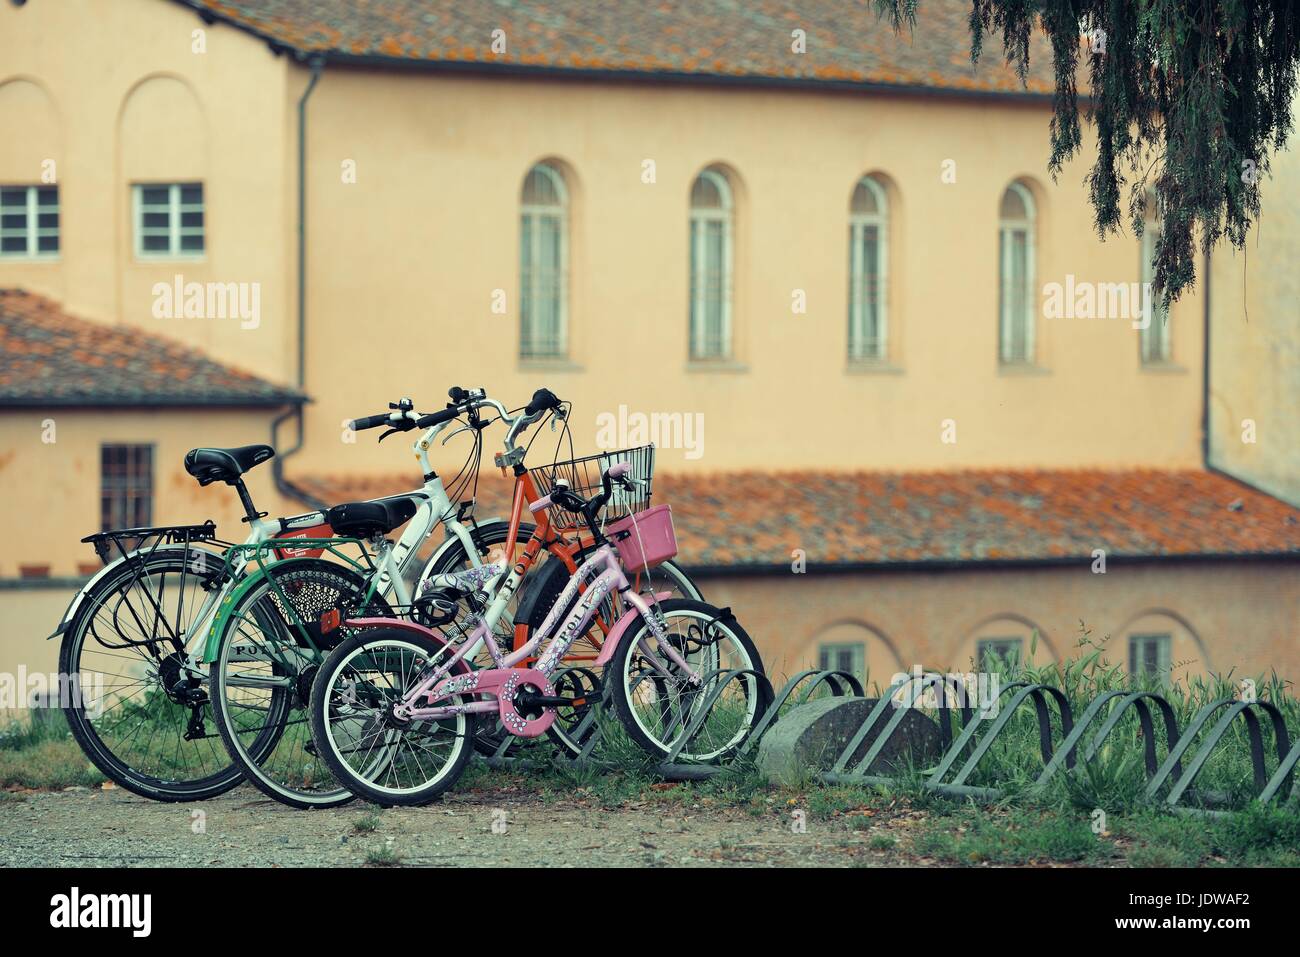 LUCCA - MAY 19: Bikes with old church on May 19, 2016 in Lucca, Italy. It is famous for its well preserved Renaissance-era city walls and the tourism  Stock Photo